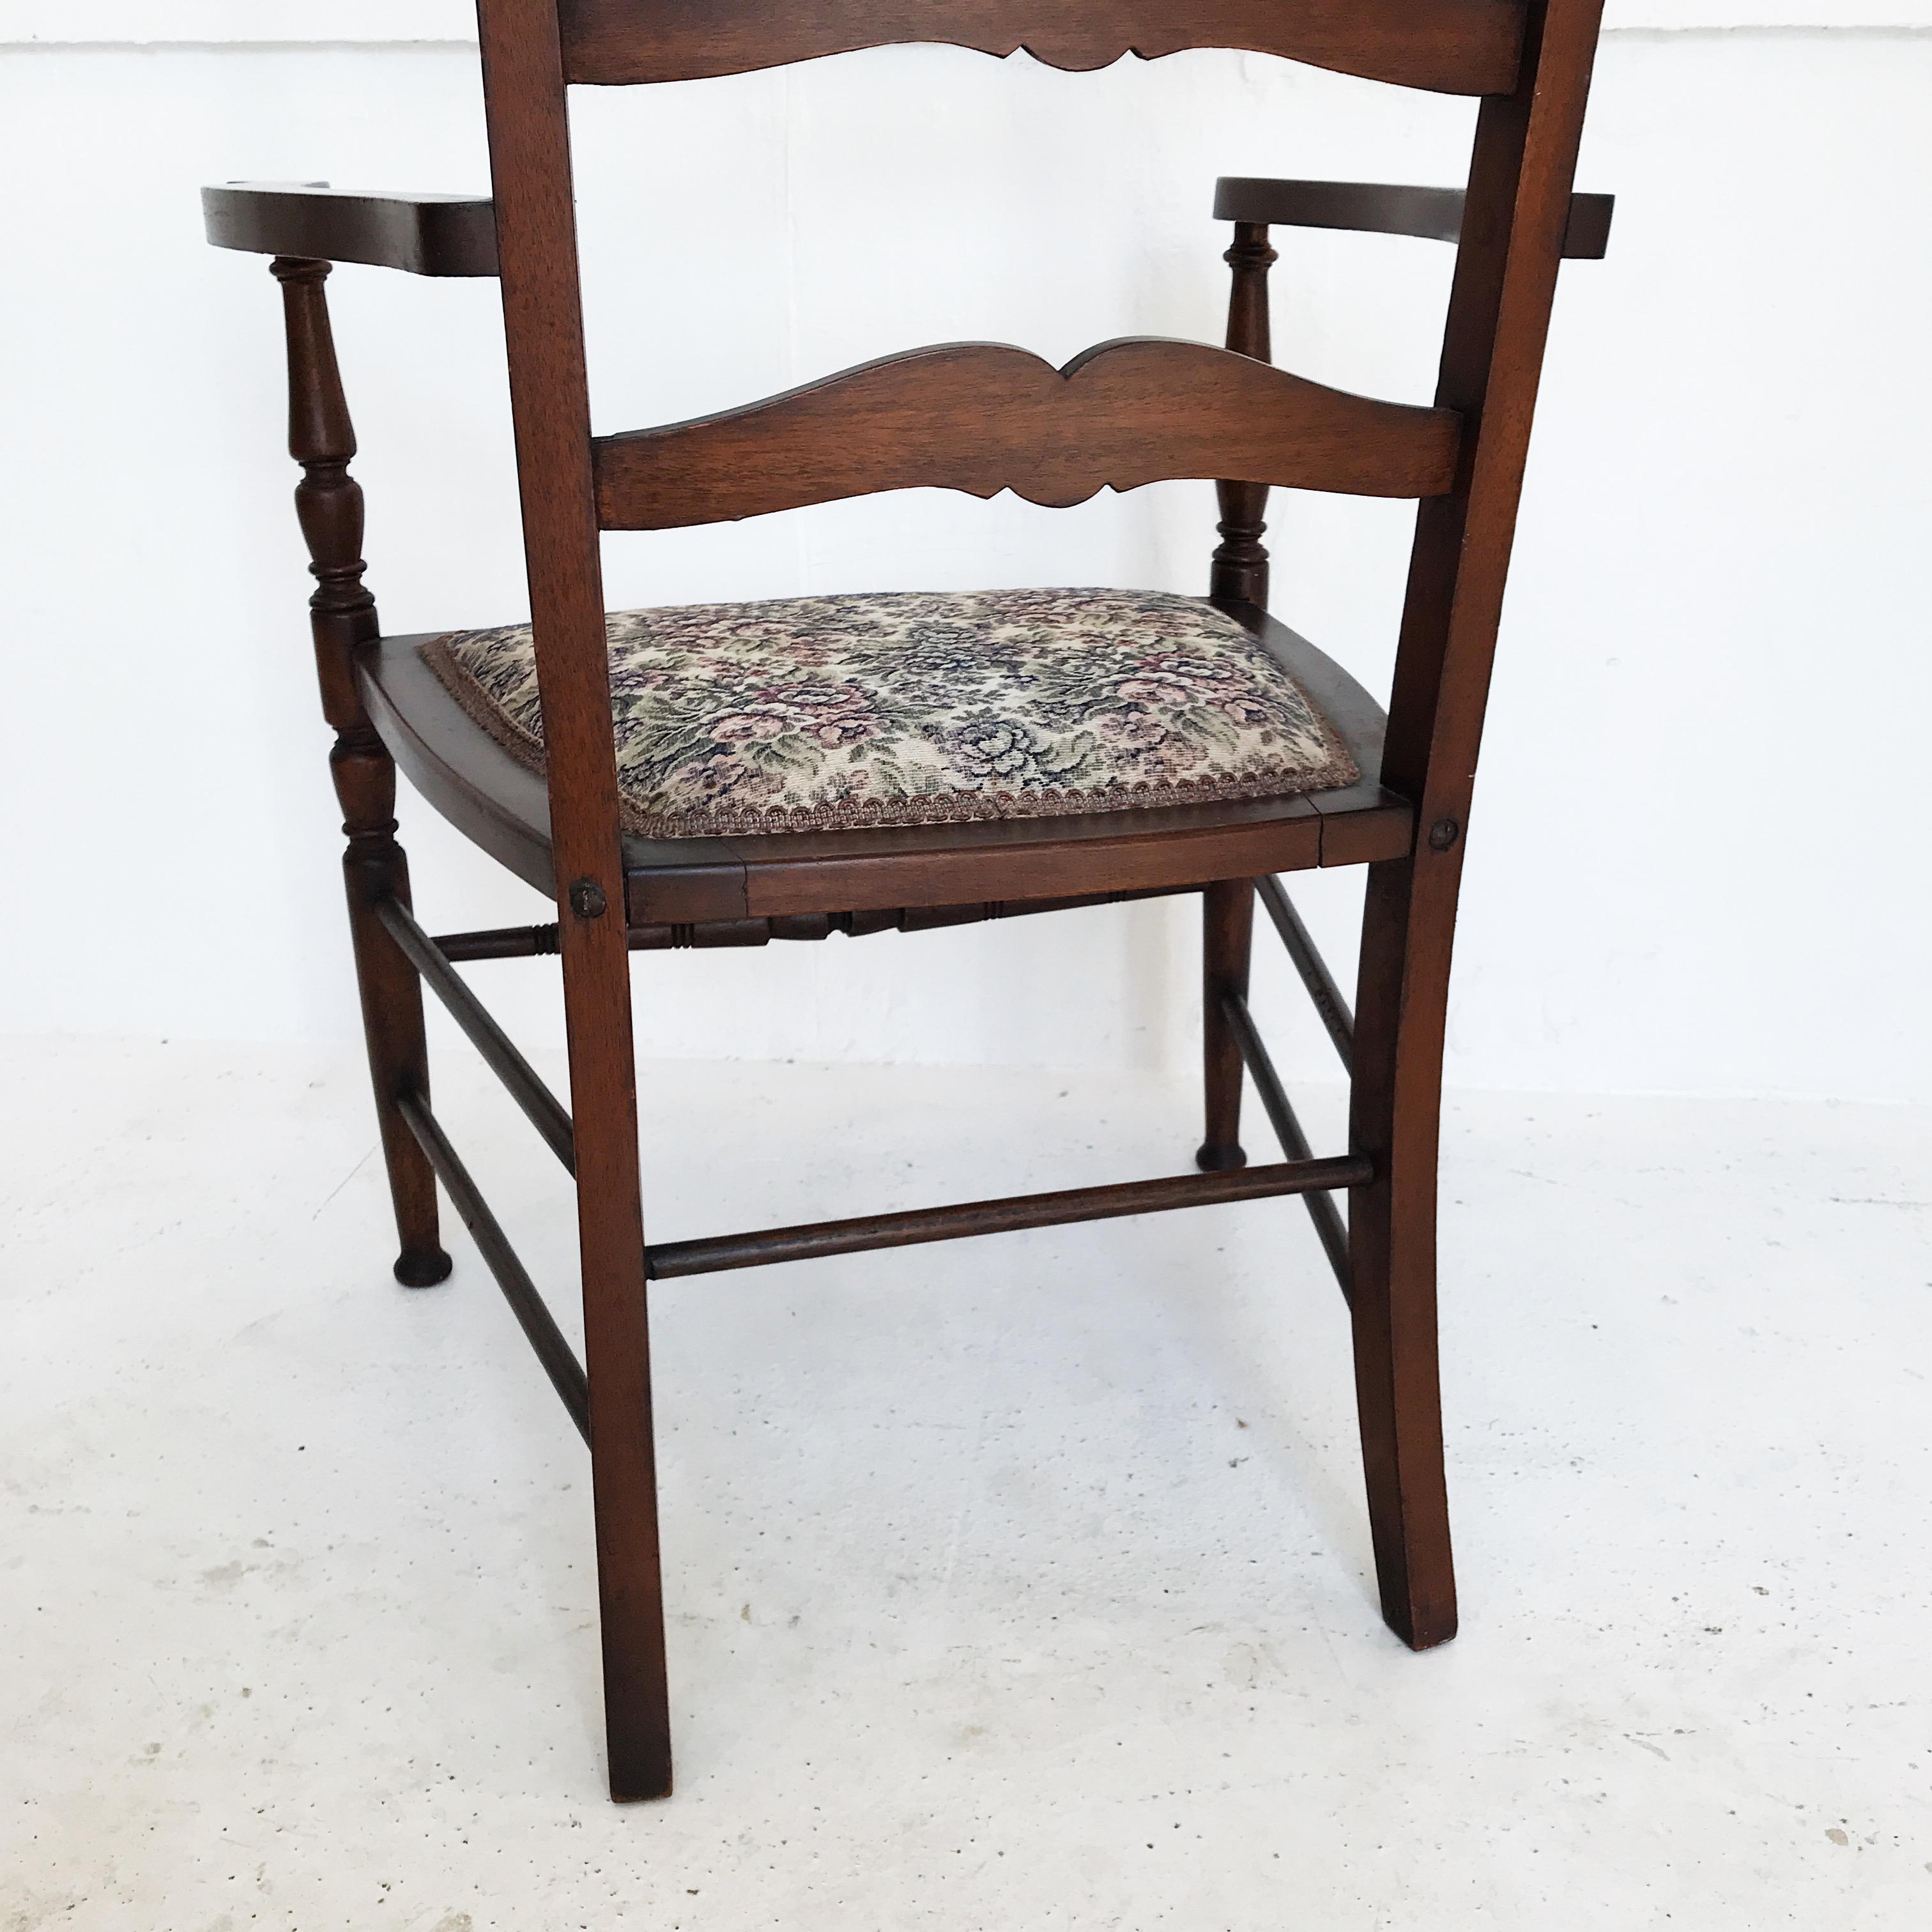 Early-20th Century Ladder Back Chair by Beard Watson Limited, Sydney, Australia For Sale 2